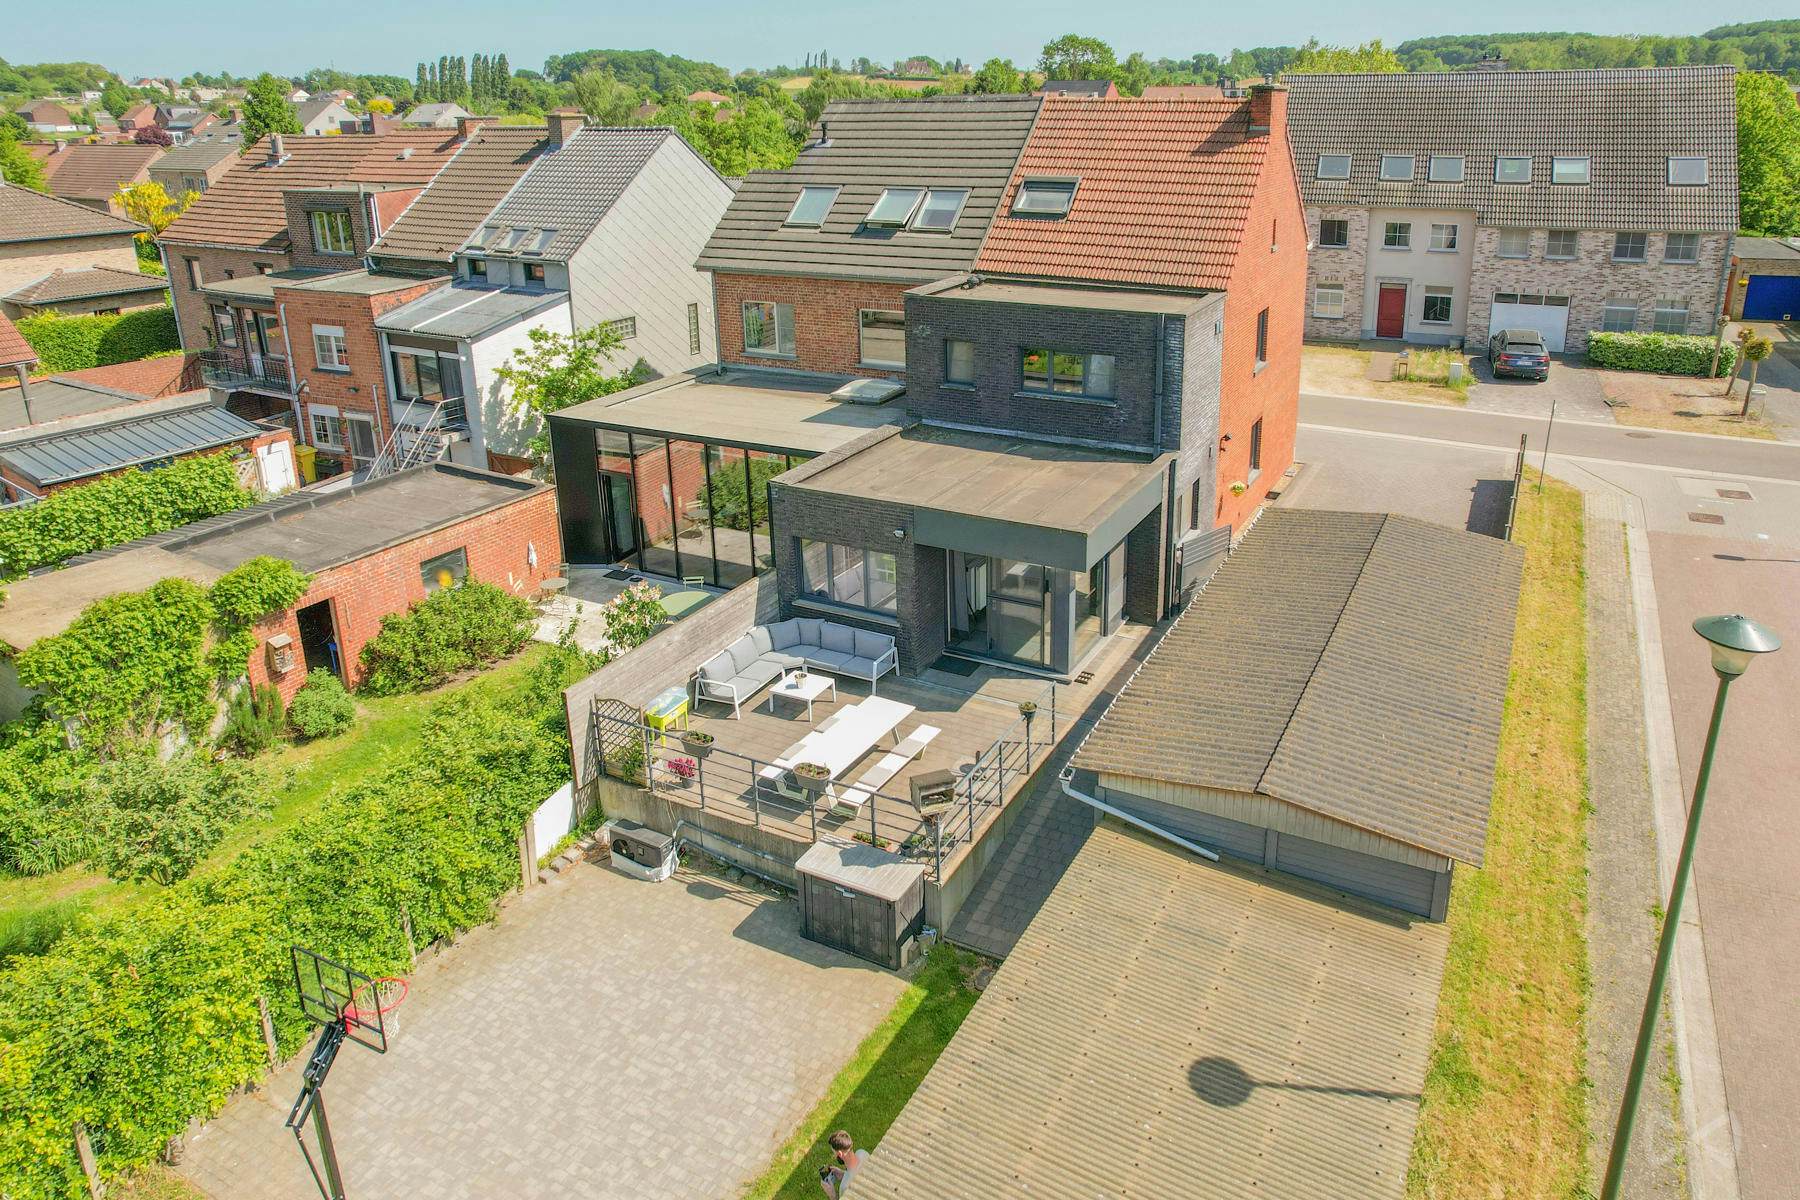 Picture 4 of 4 for House with three bedrooms in Lubbeek Linden